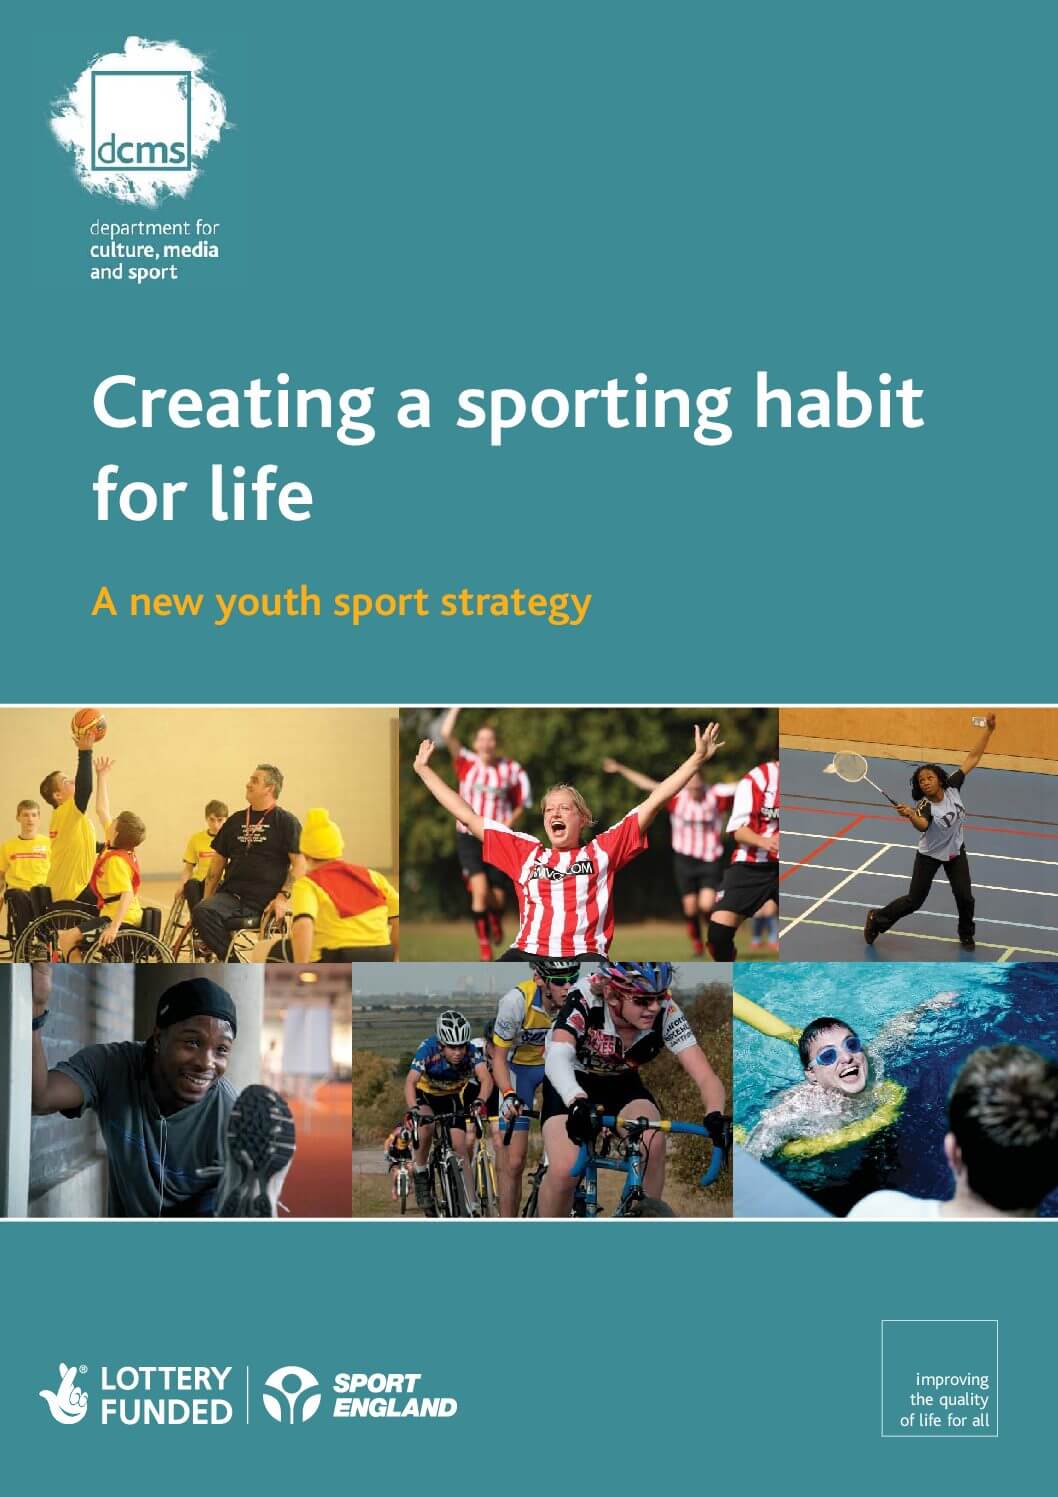 Creating a sporting habit for life – a new youth sport strategy